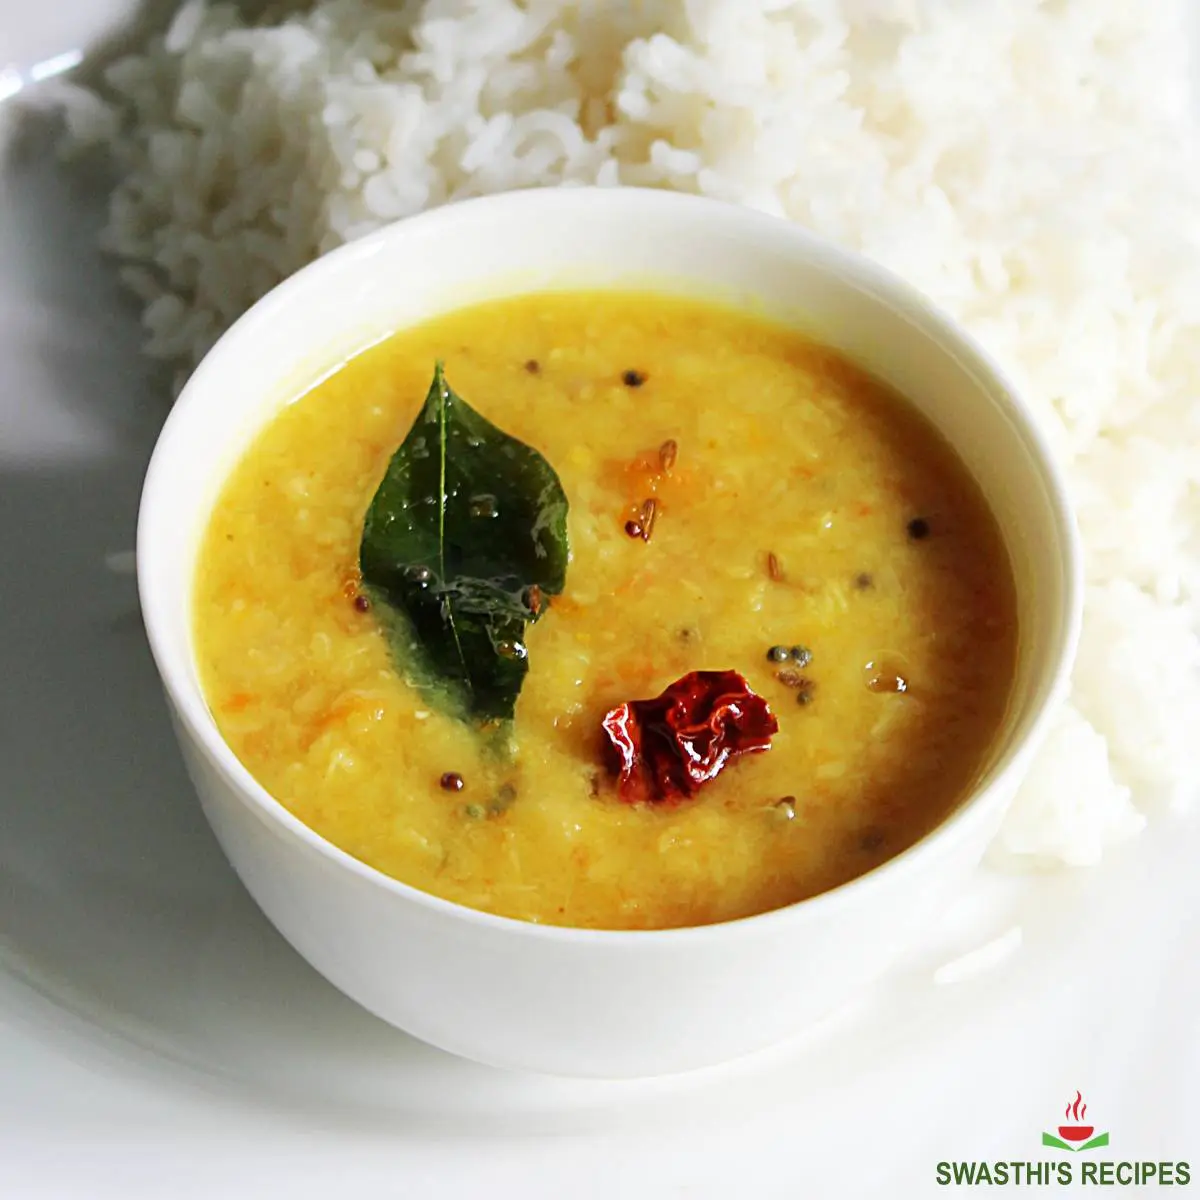 Andhra tomato dal made with split pigeon peas